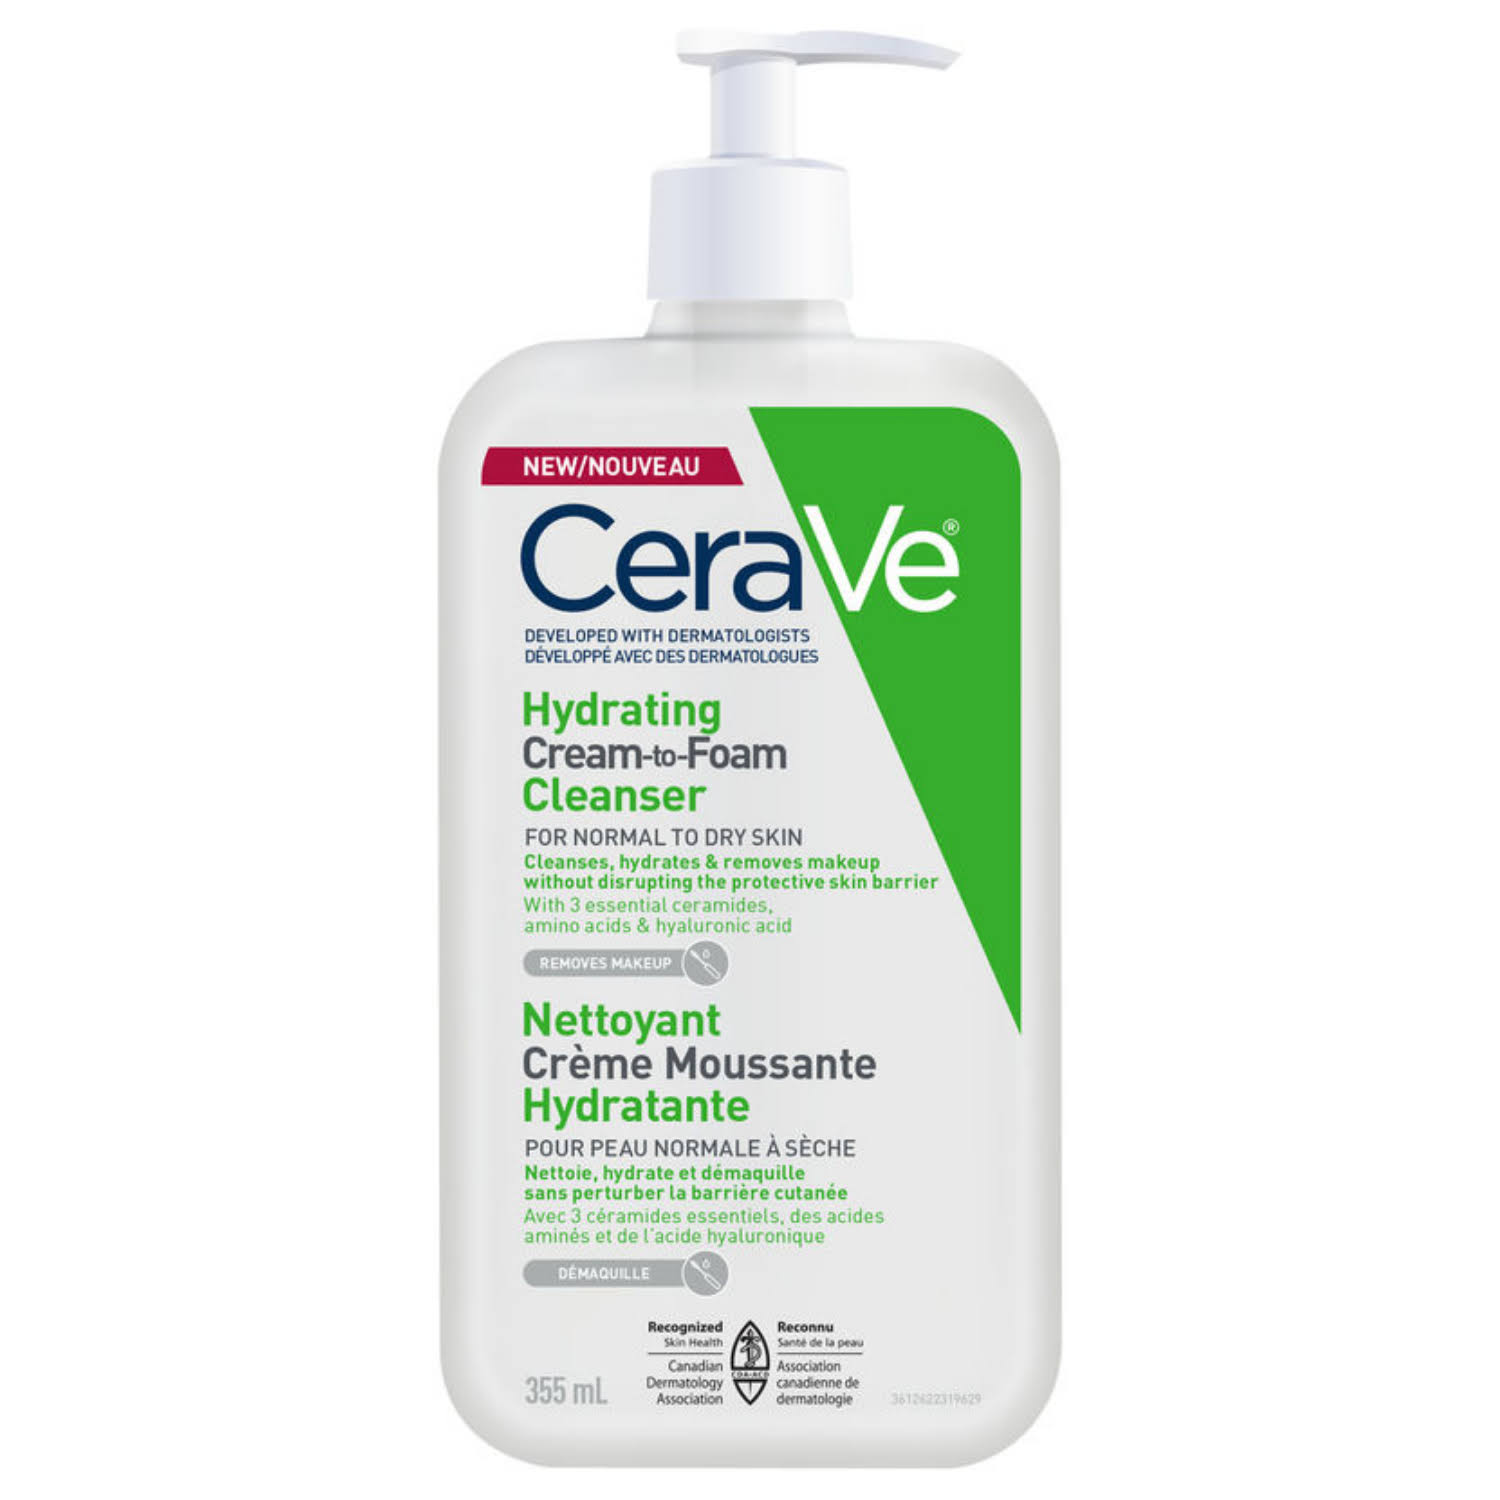 Cerave Hydrating Cream-to-Foam Cleanser with Hyaluronic Acid 355 ml